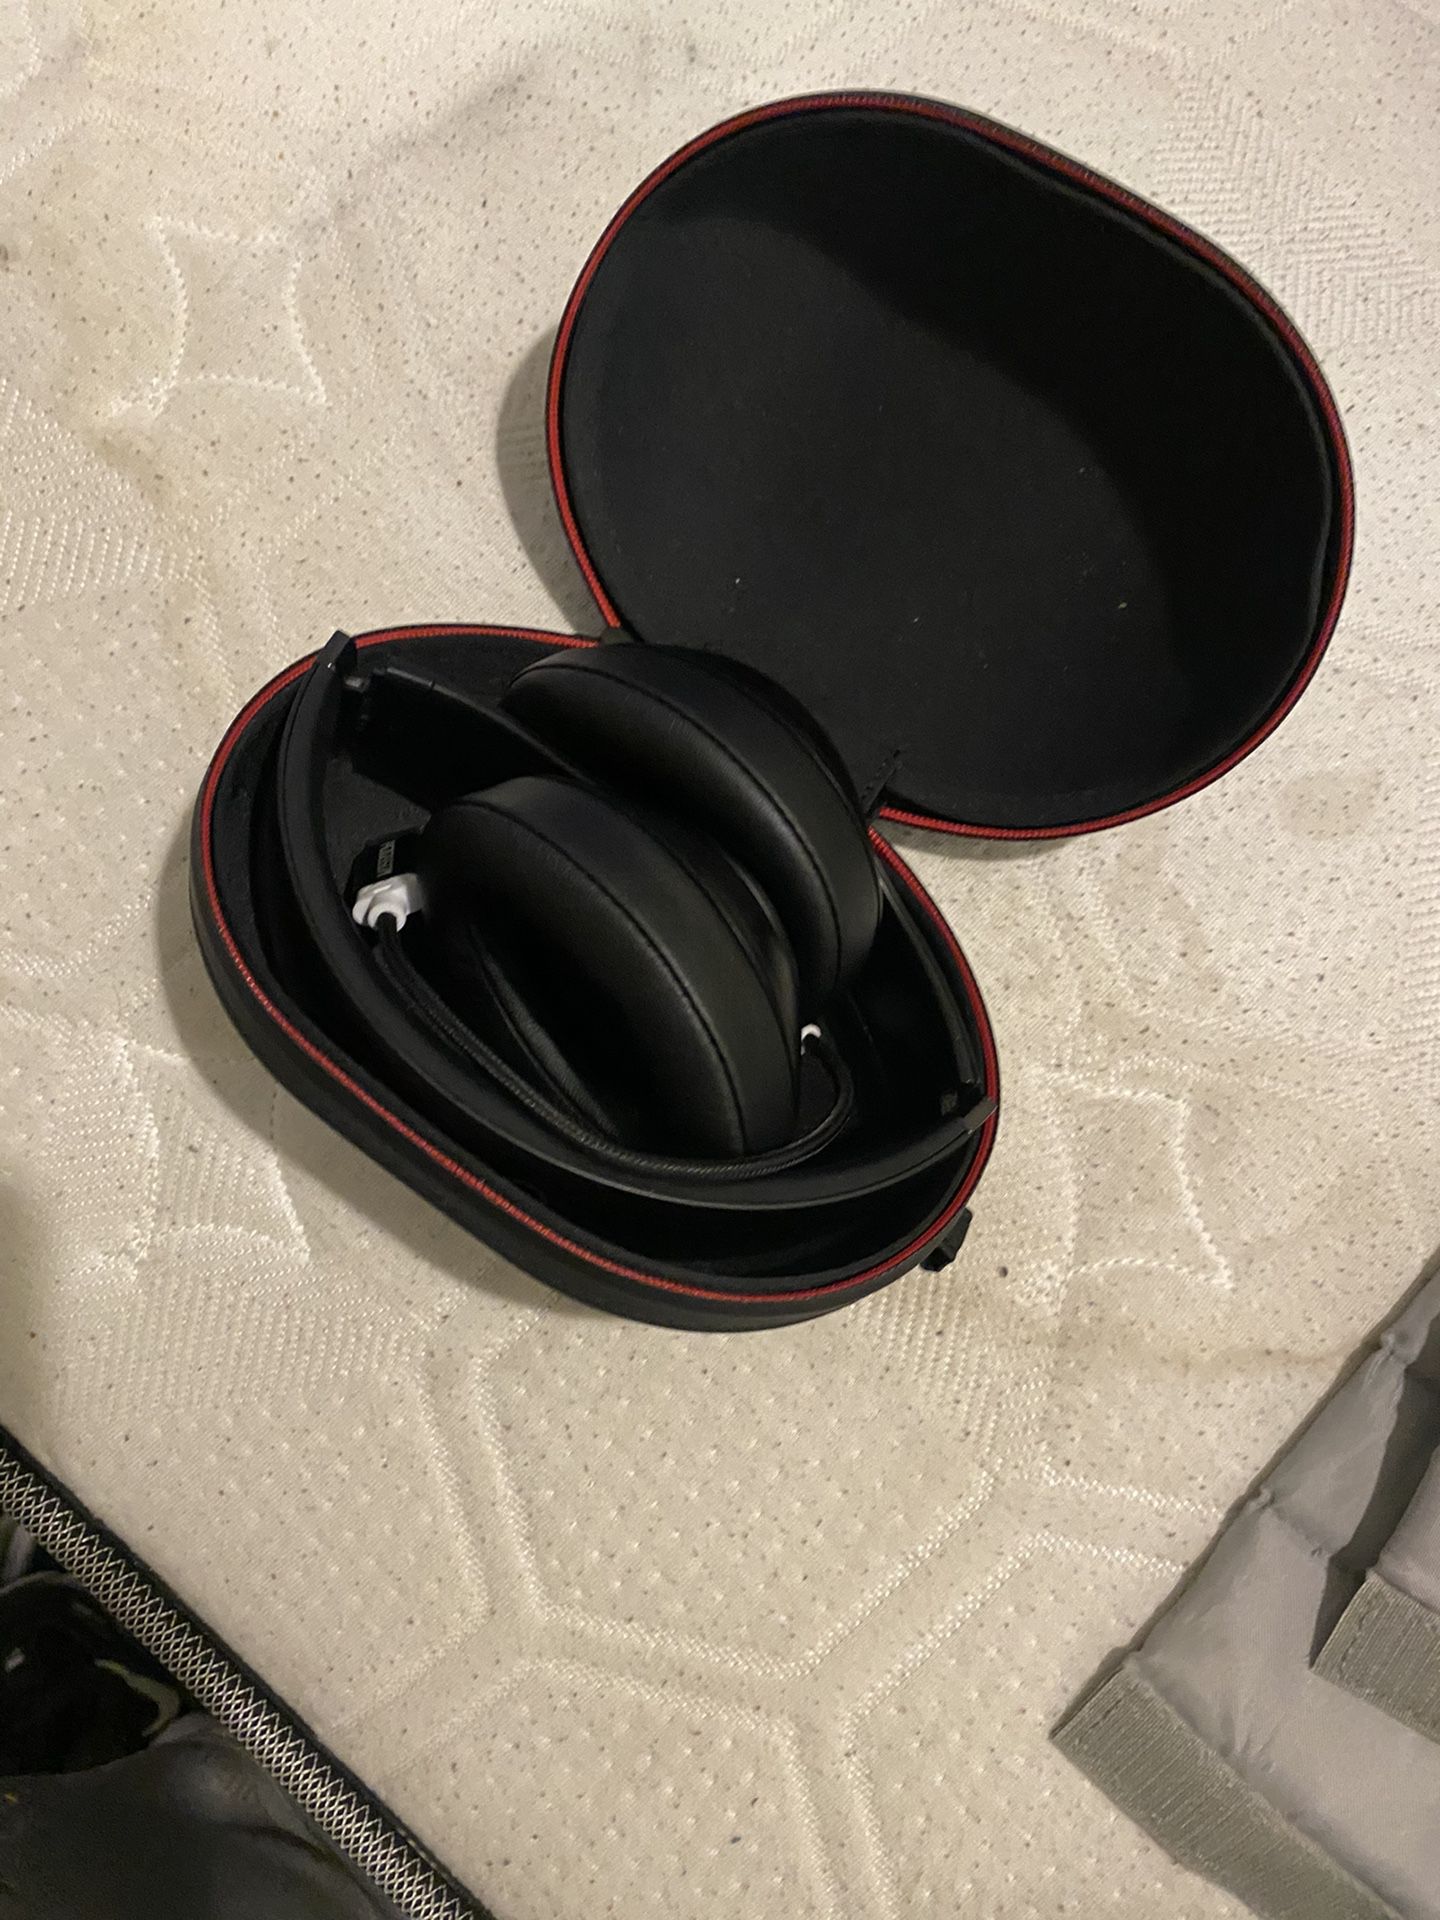 Beats wireless studio 3s real authentic you can hear them first to see